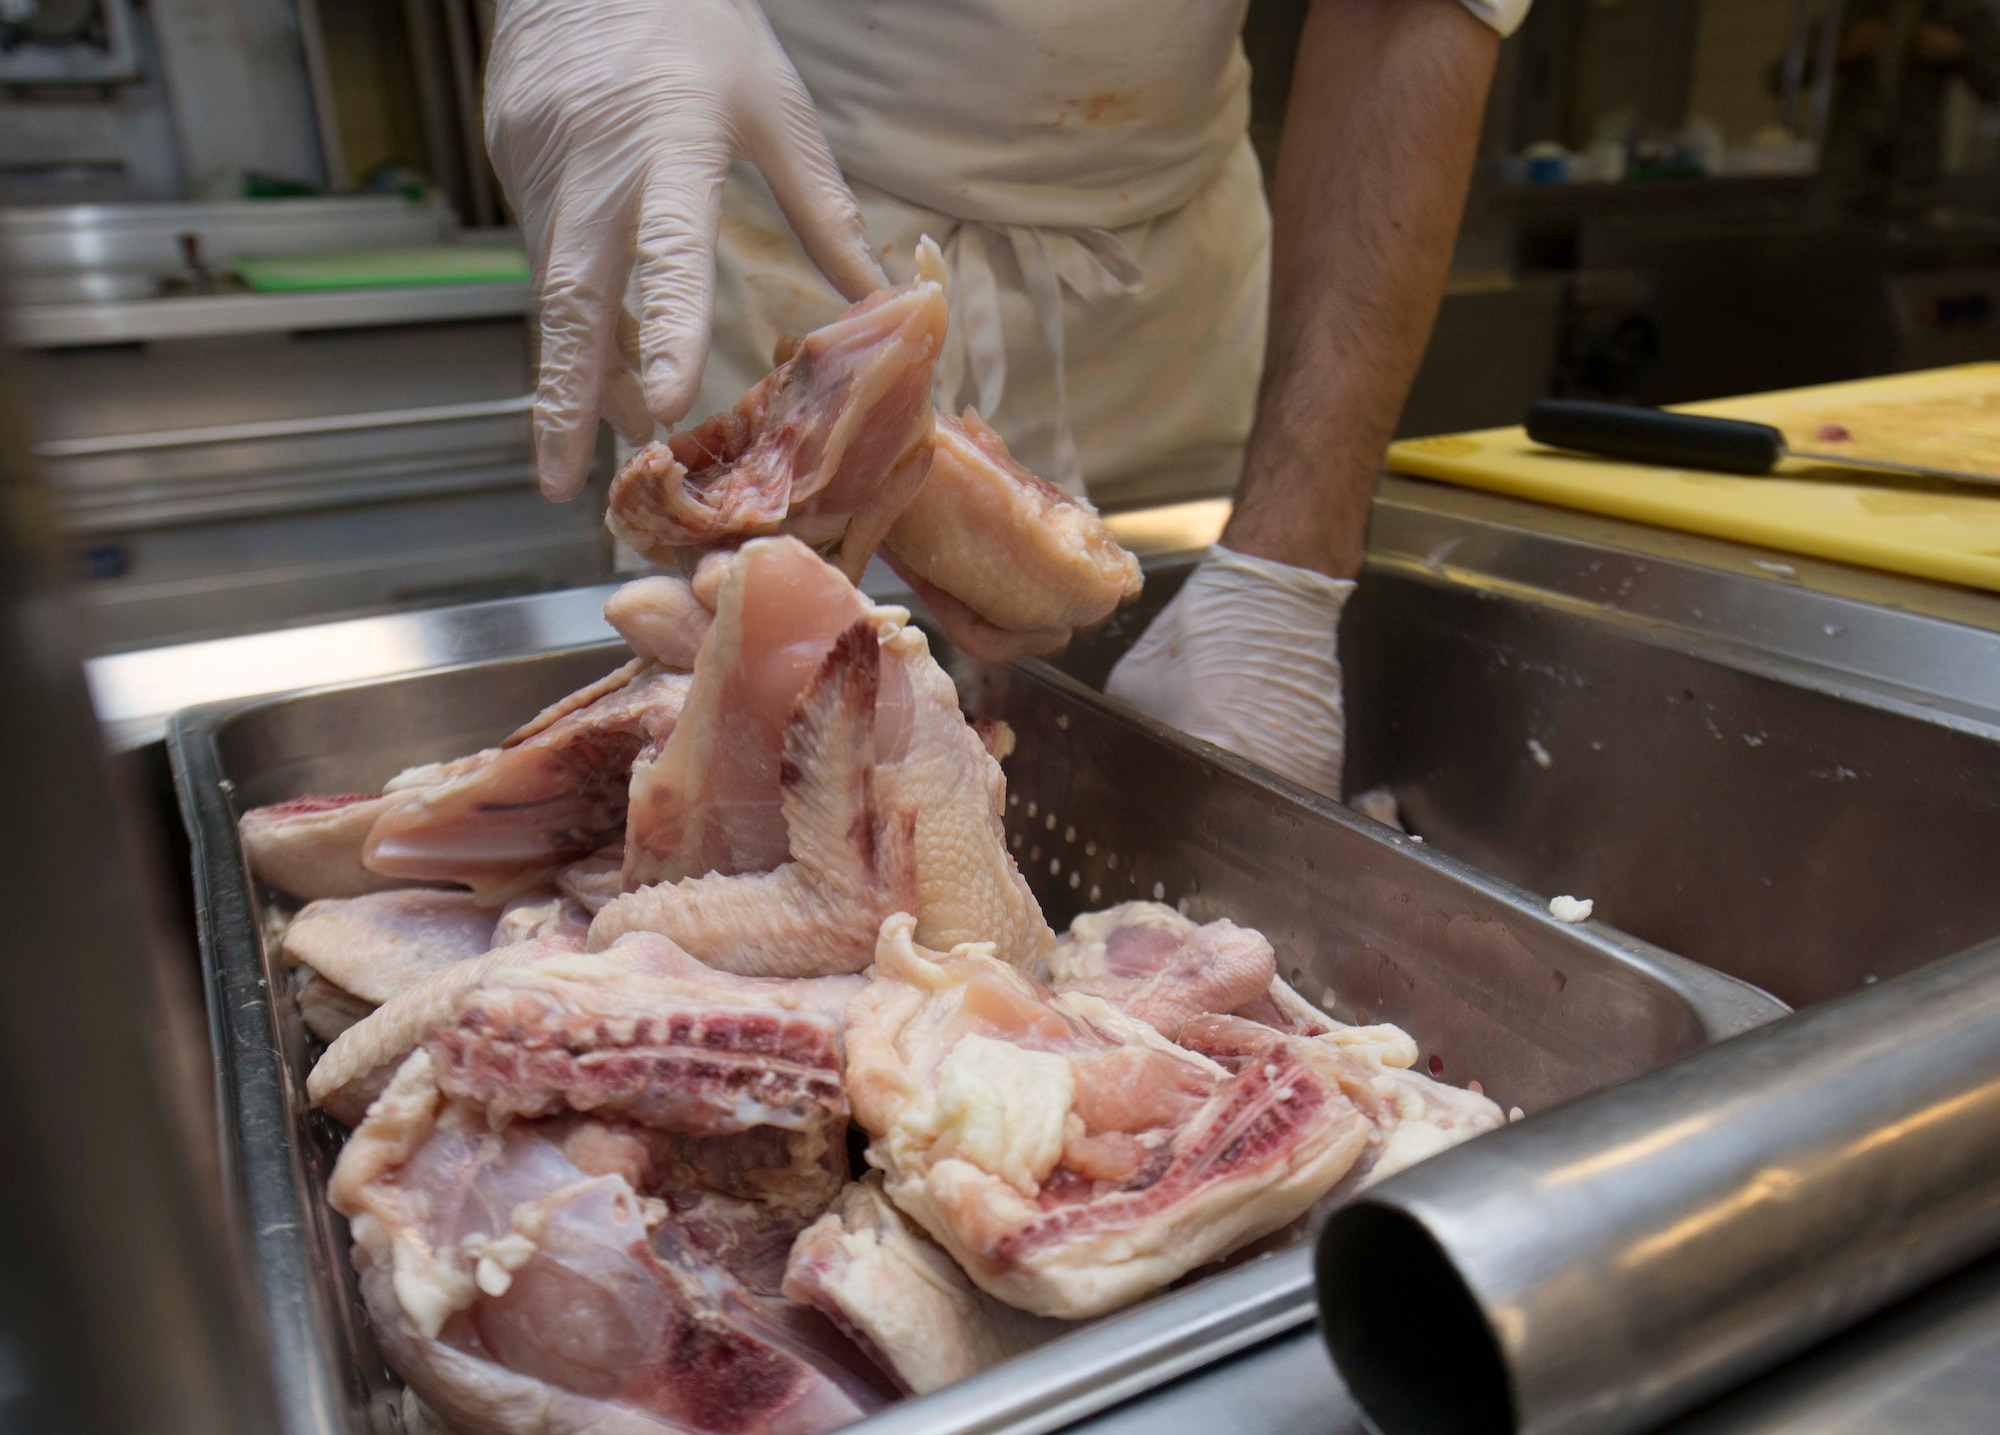 Carsten Mueller, 786th Force Support Squadron Rheinland Inn lead cook, prepares chicken for lunch on Ramstein Air Base, Germany, Nov. 3, 2017. The Rheinland Inn mission is to provide nutritious, flavorful and quality meals for dormitory residents. (U.S. Air Force photo by Senior Airman Elizabeth Baker)